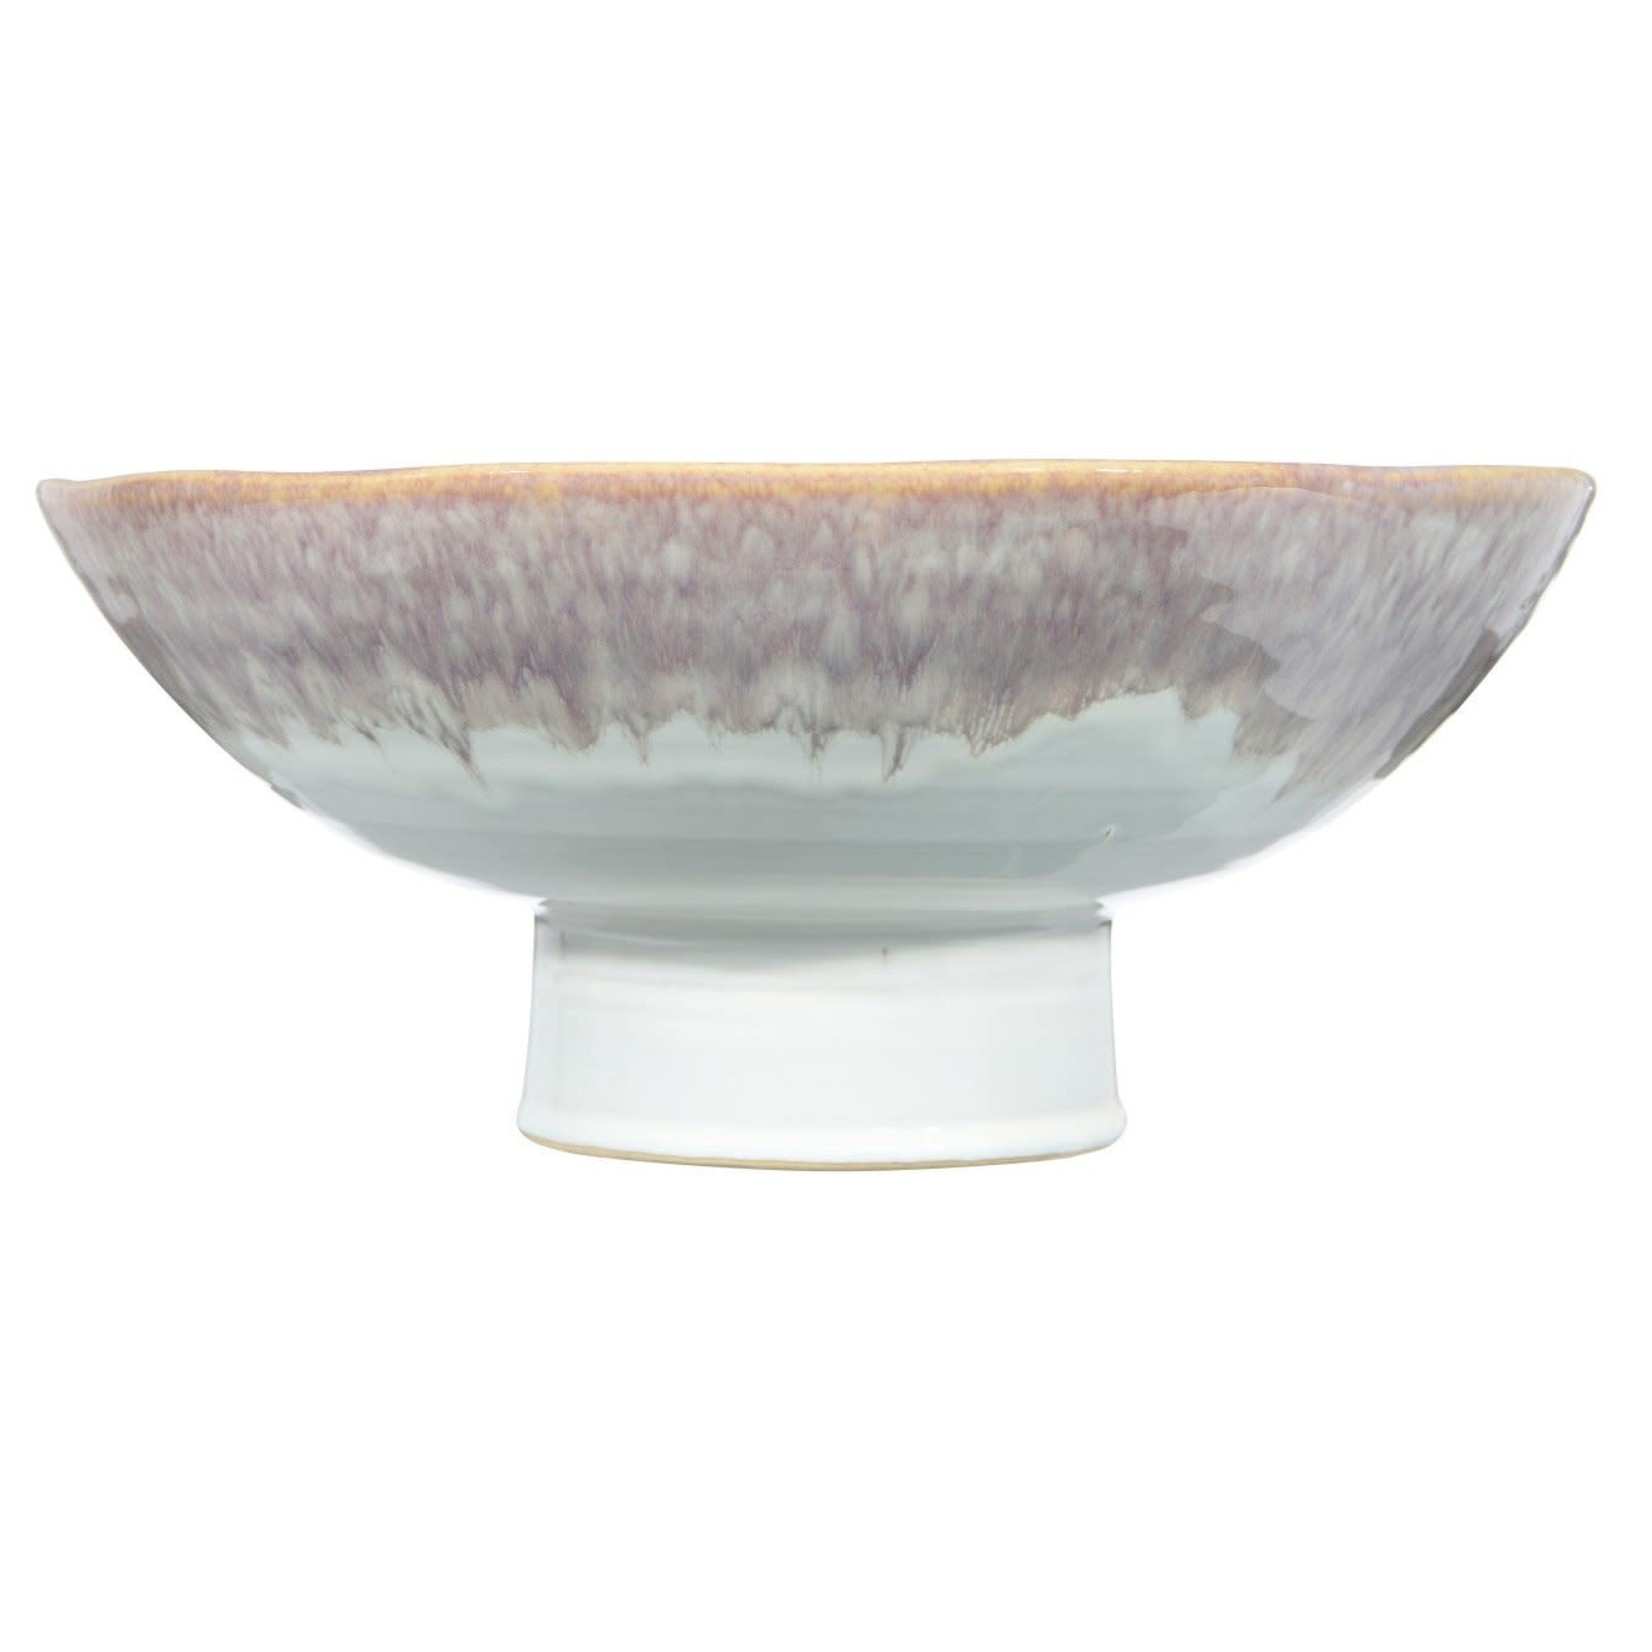 BLOOMINGVILLE FOOTED STONEWARE BOWL